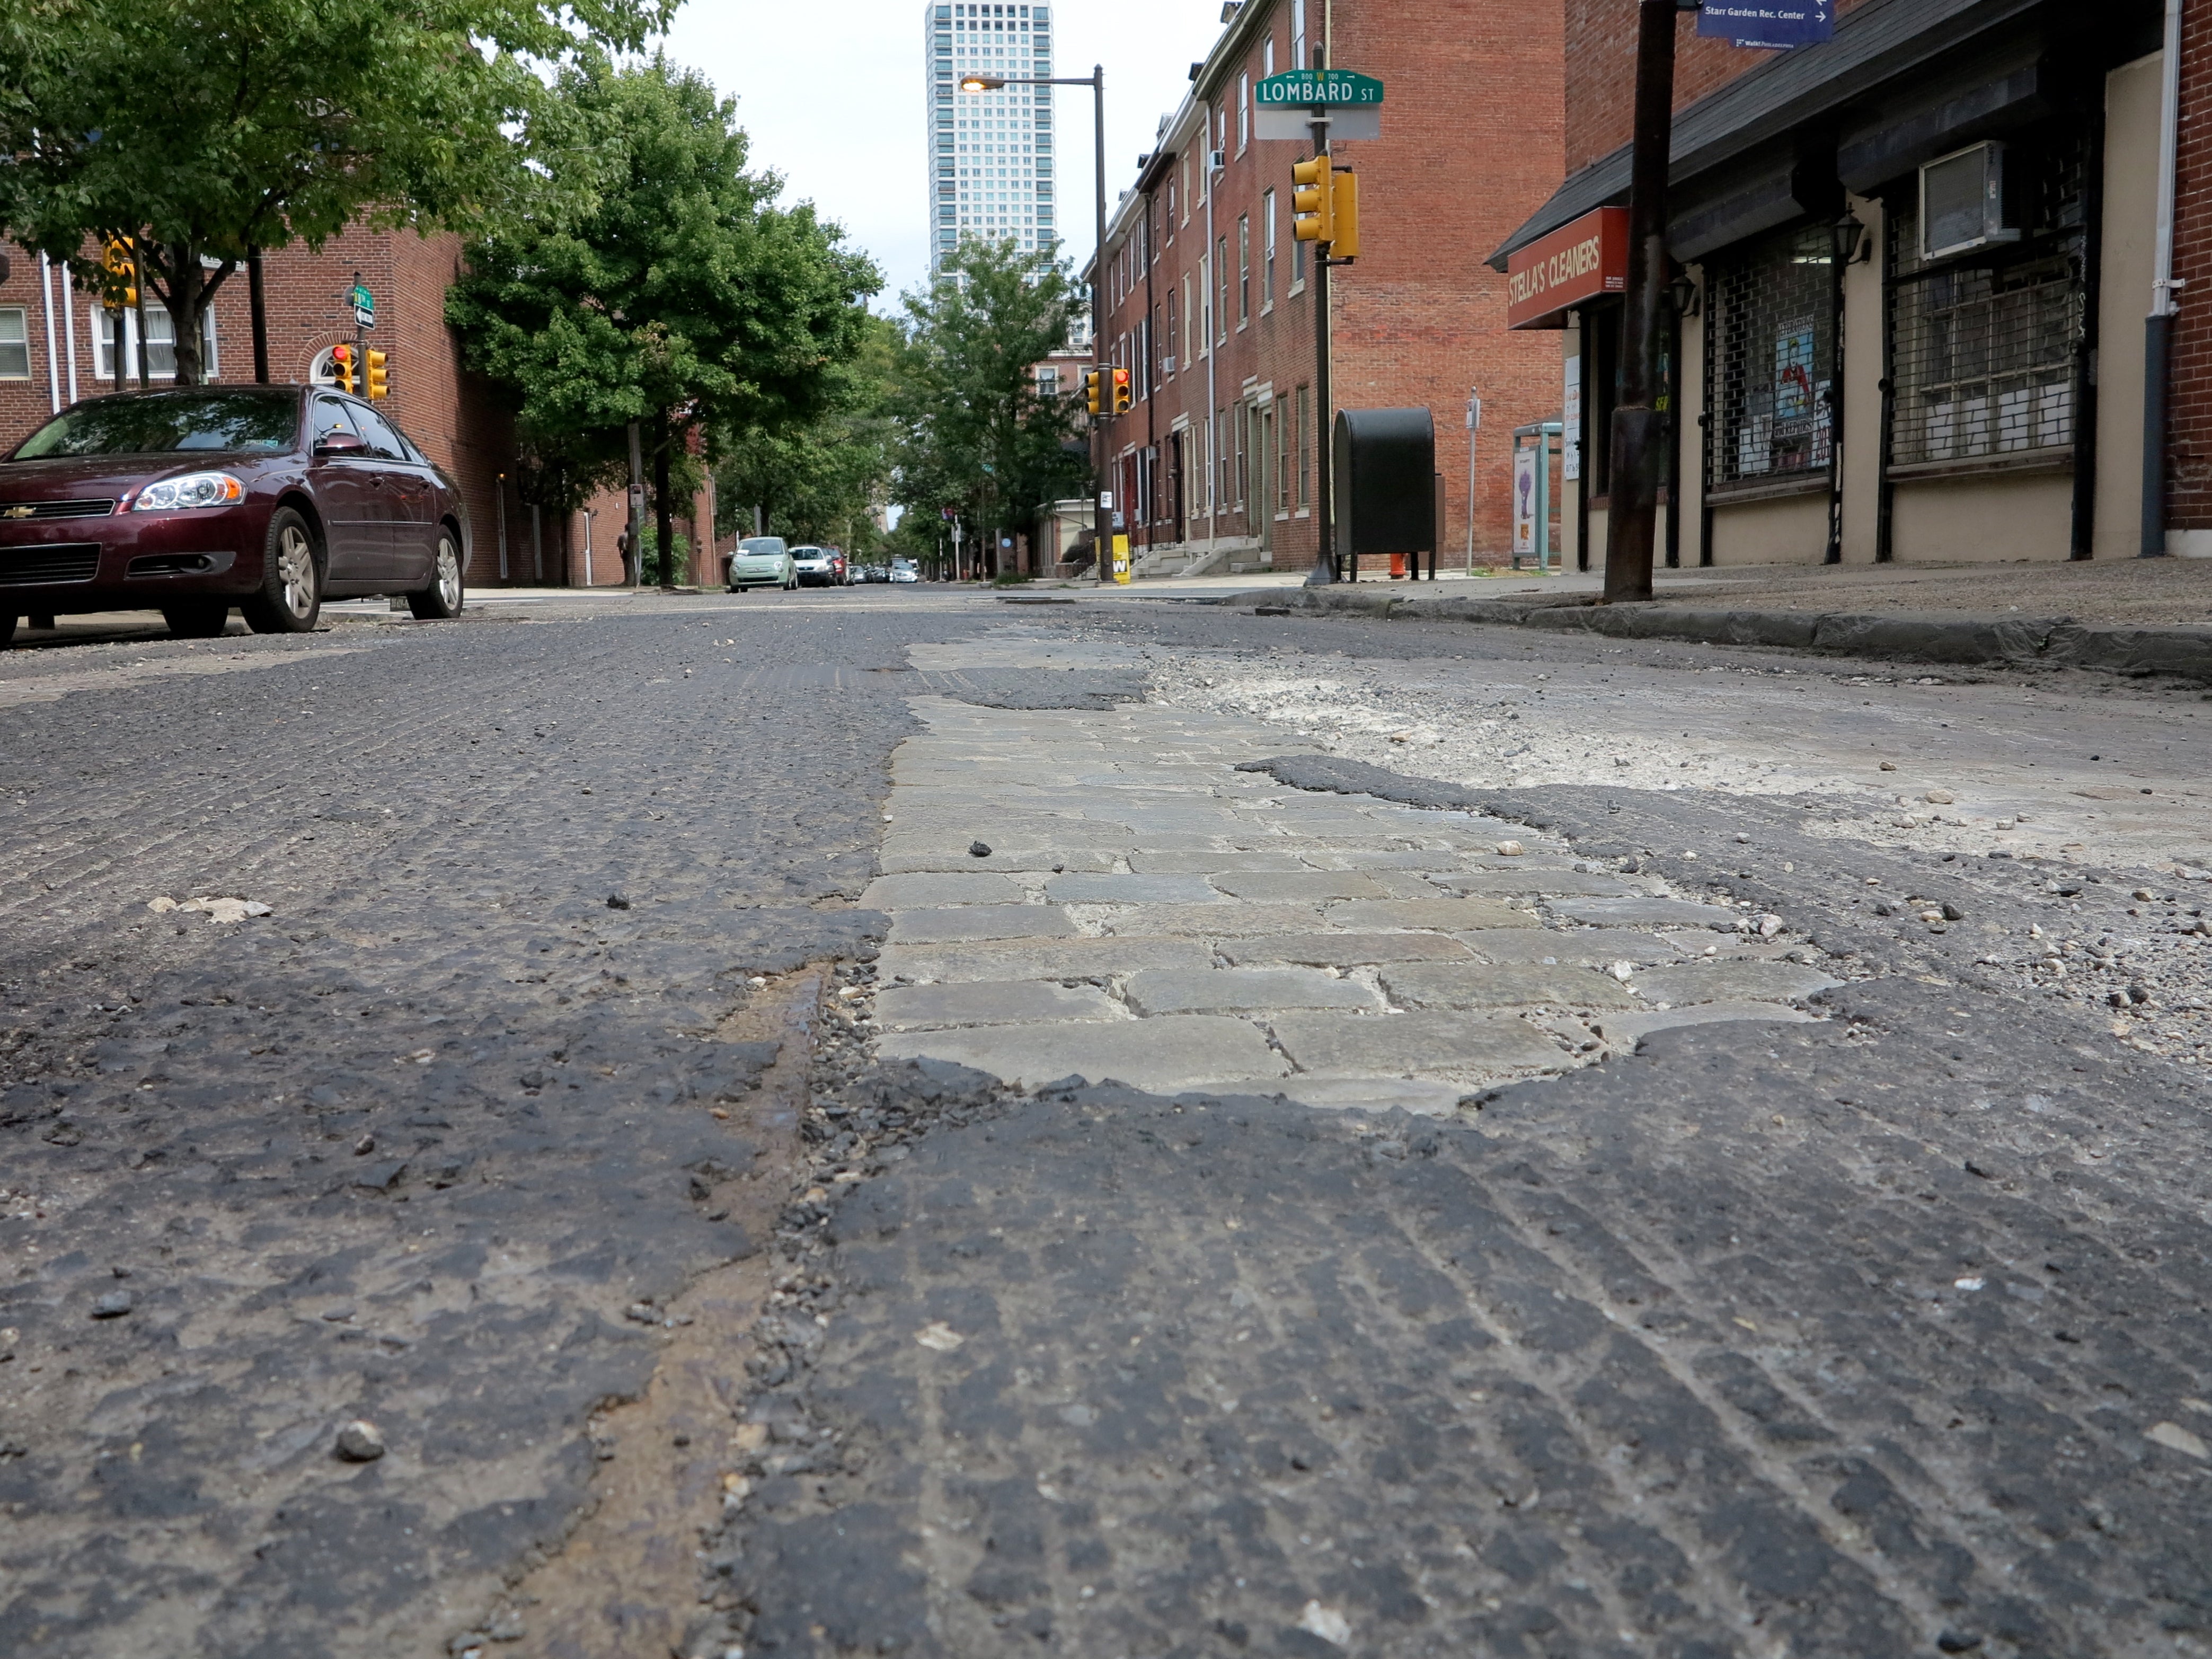 Milled road reveals trolley track and cobblestone street buried below the asphalt.